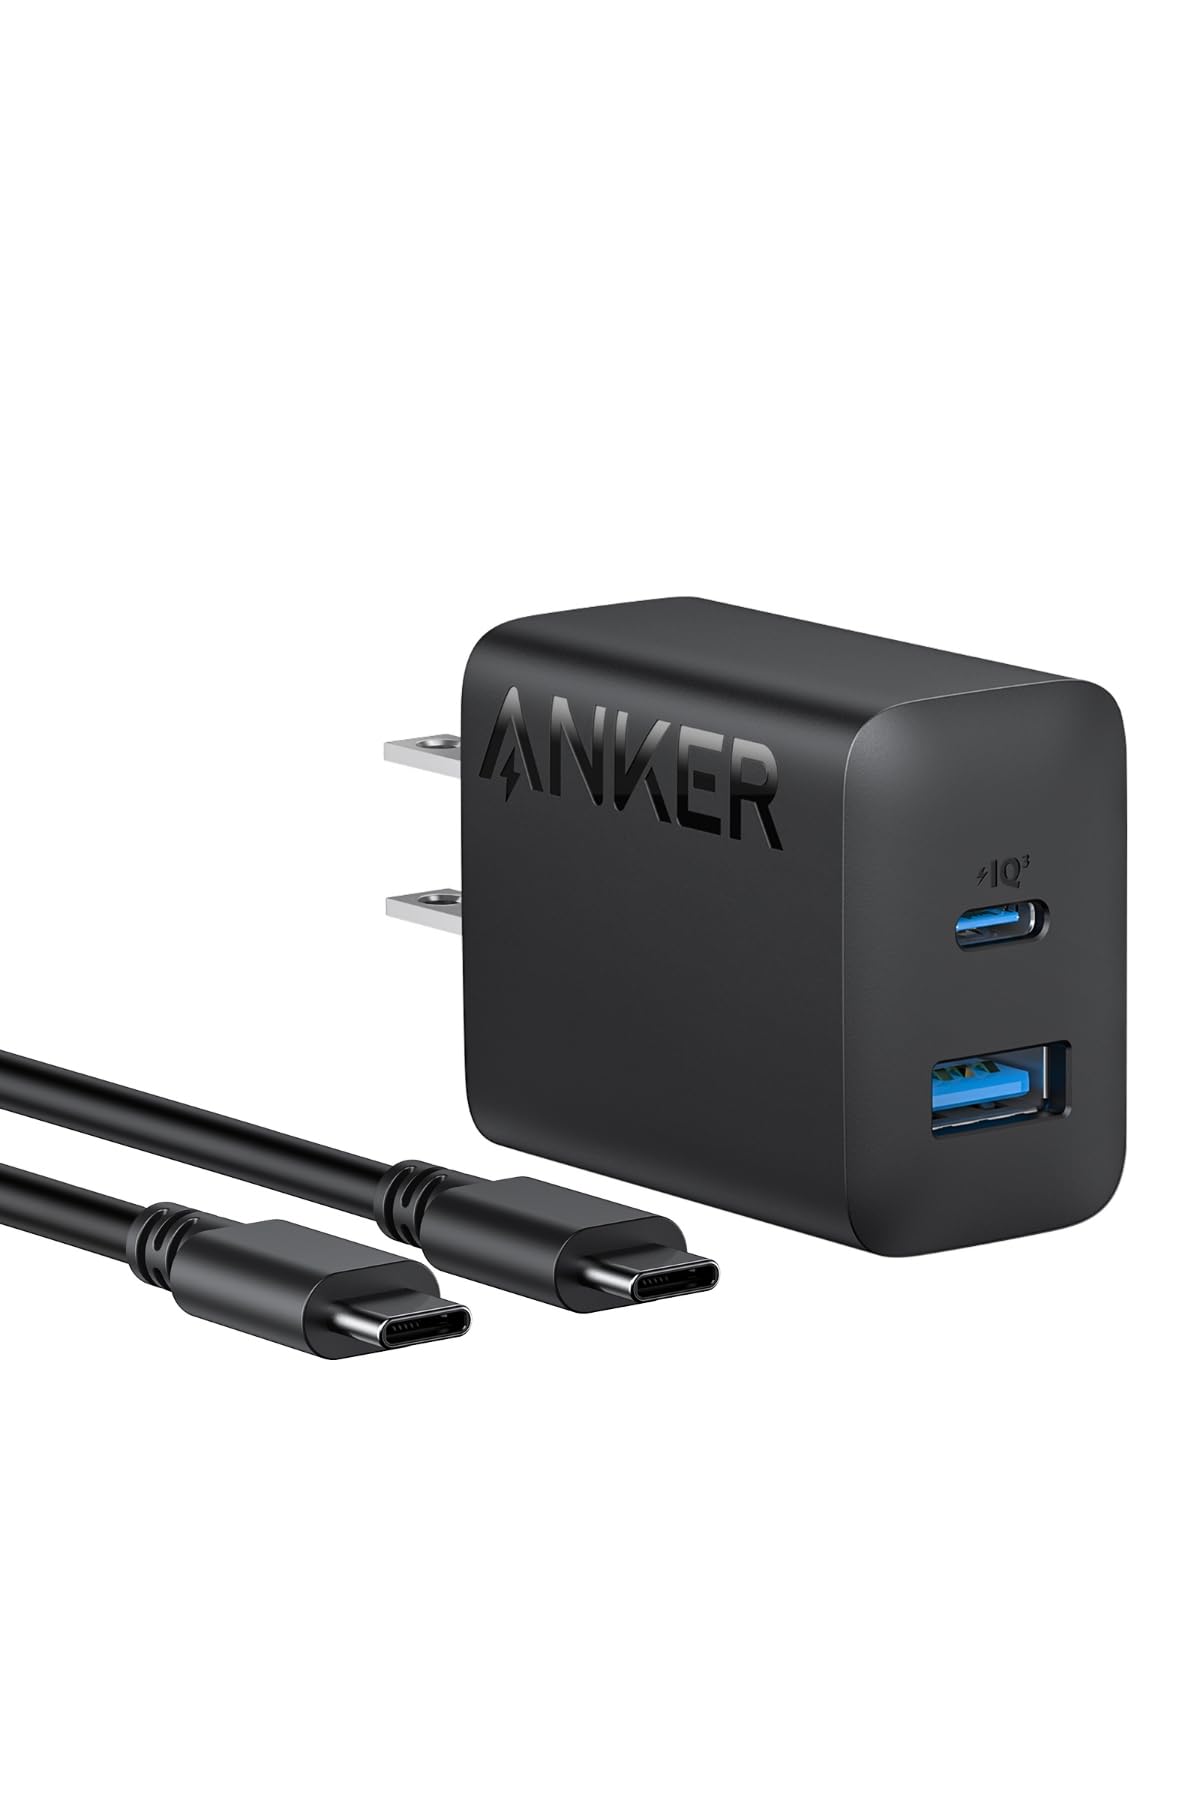 Anker Charger (20W, 2-Port) wi